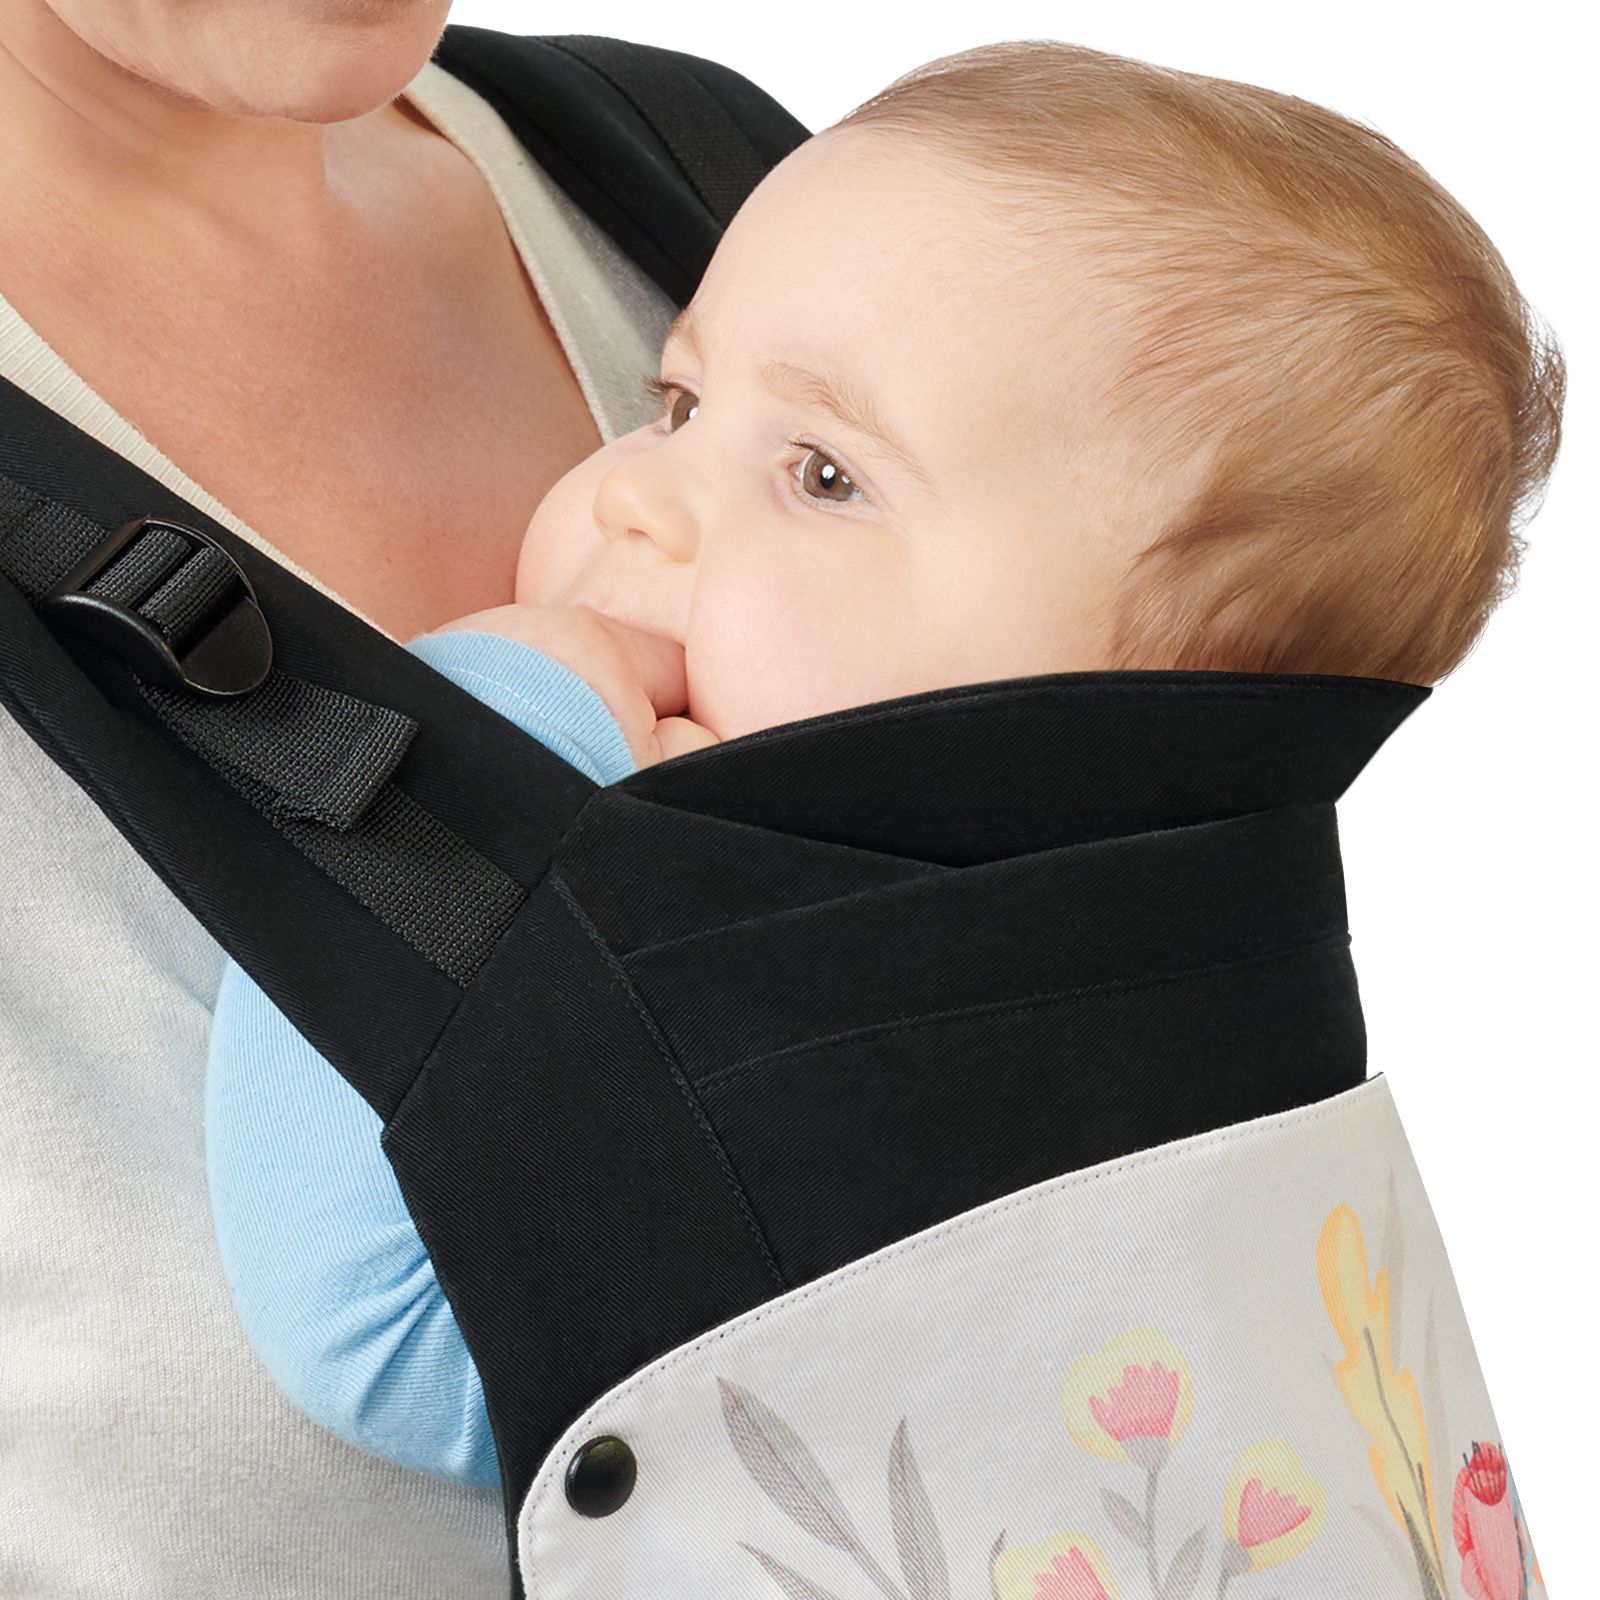 Ideal support for the baby's head